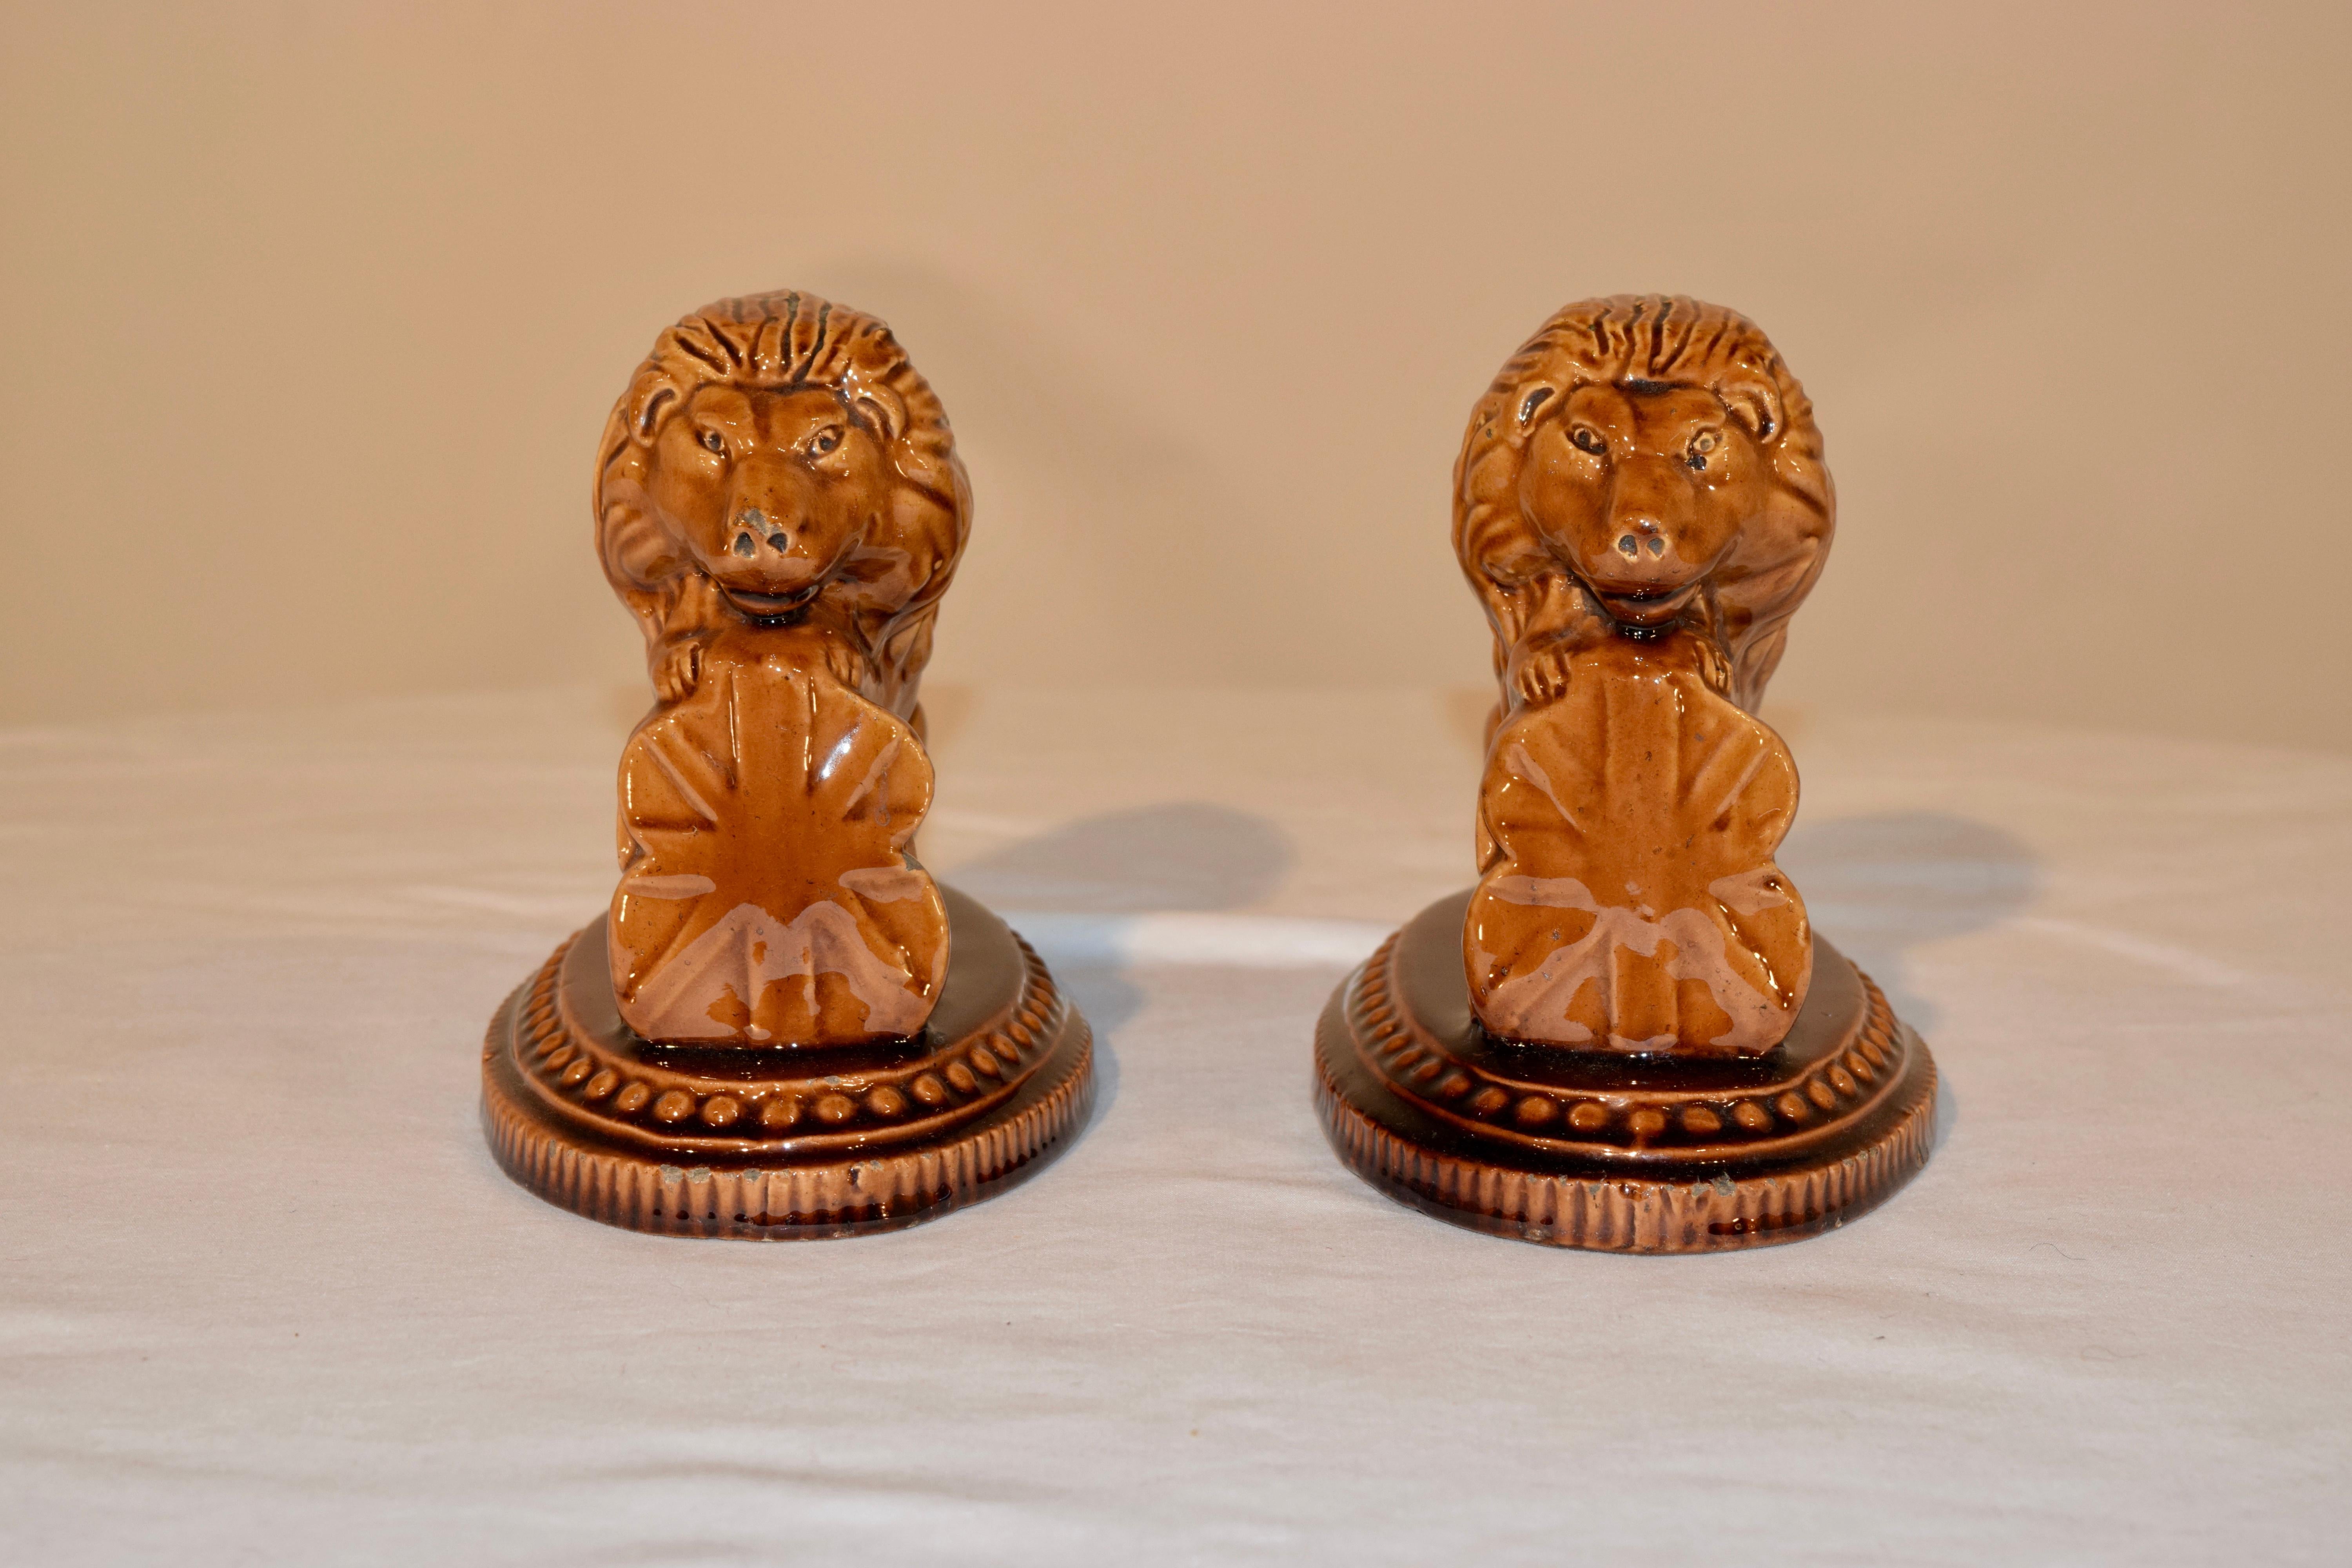 19th century pair of pottery figures of lions resting on English shields. They are sitting on molded bases which are beaded around the platforms. Wonderful color. No maker's mark.